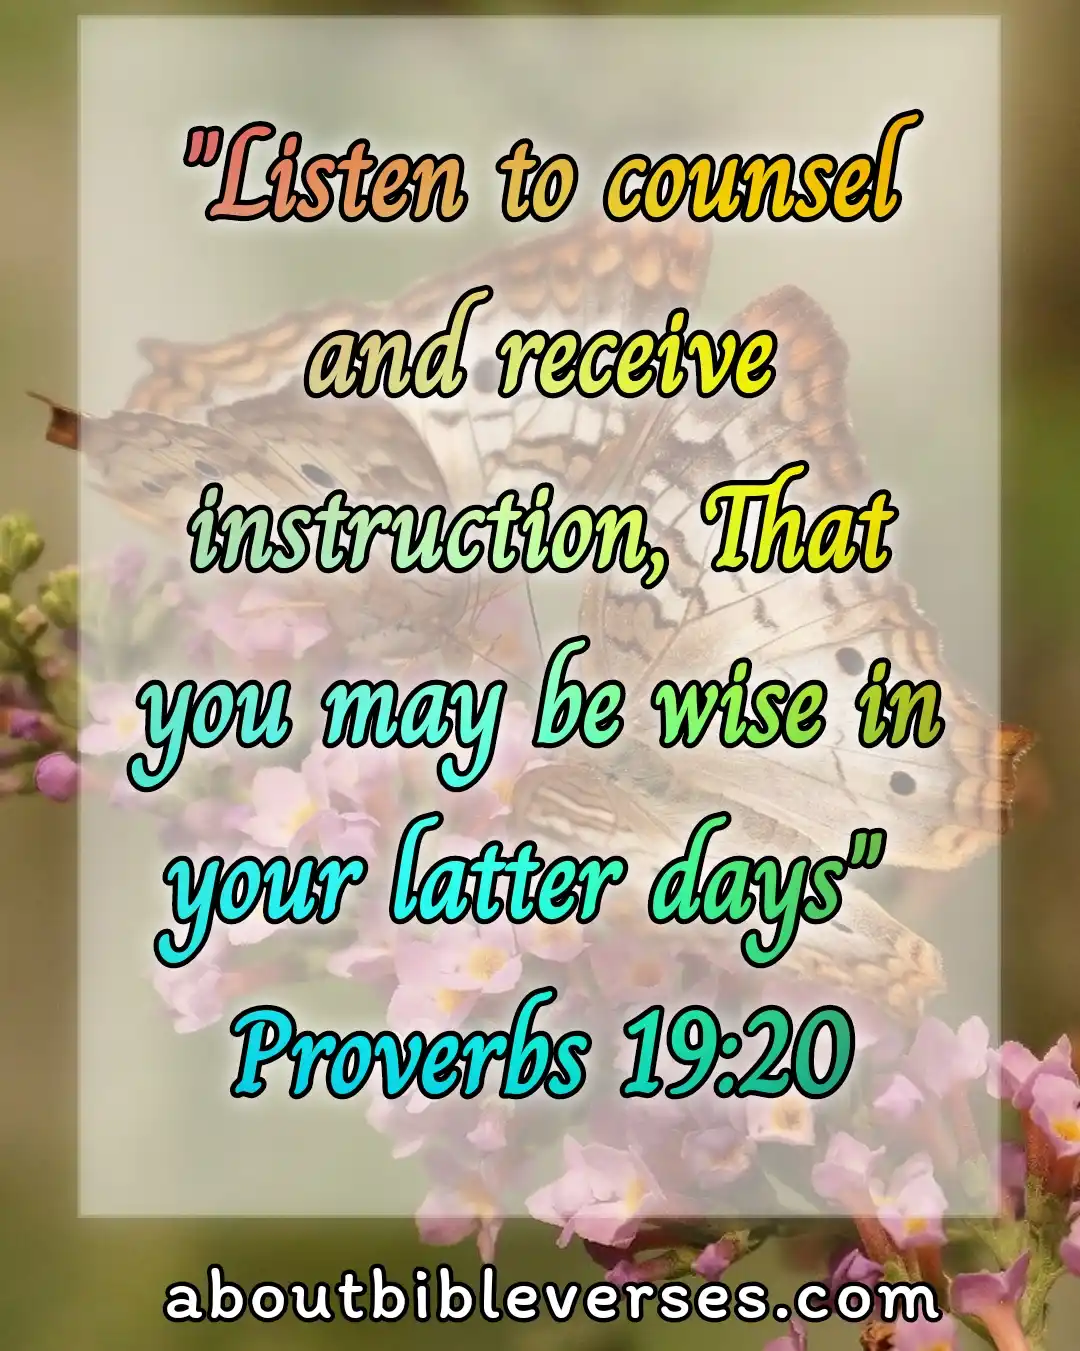 bible verses about wisdom (Proverbs 19:20)